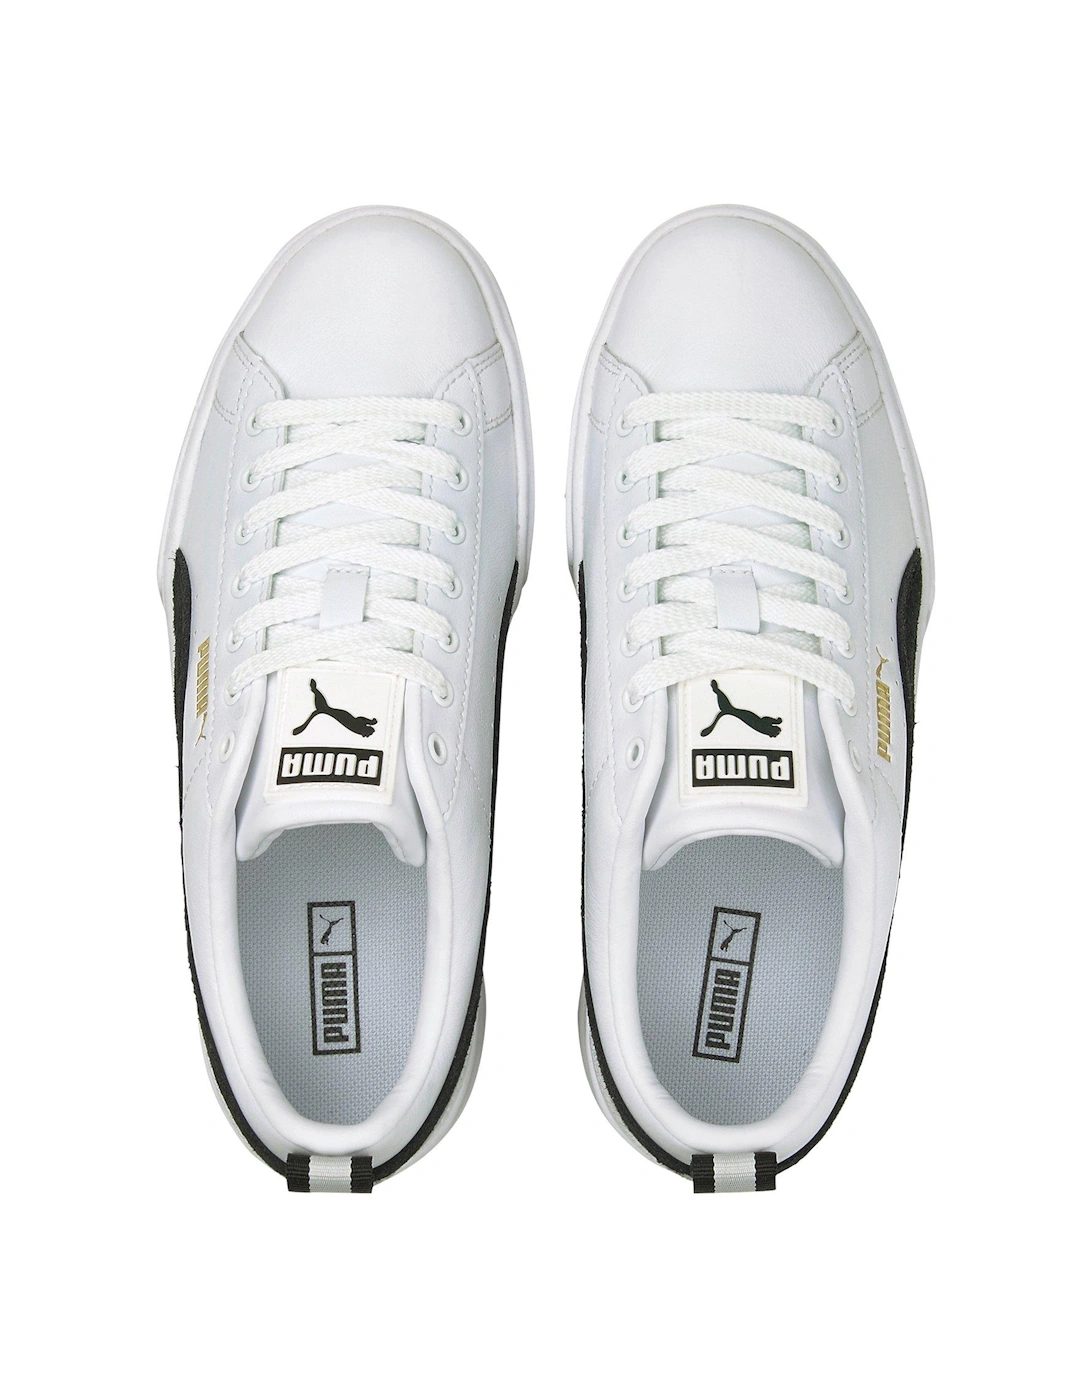 Womens Mayze Leather Trainers - White/Black